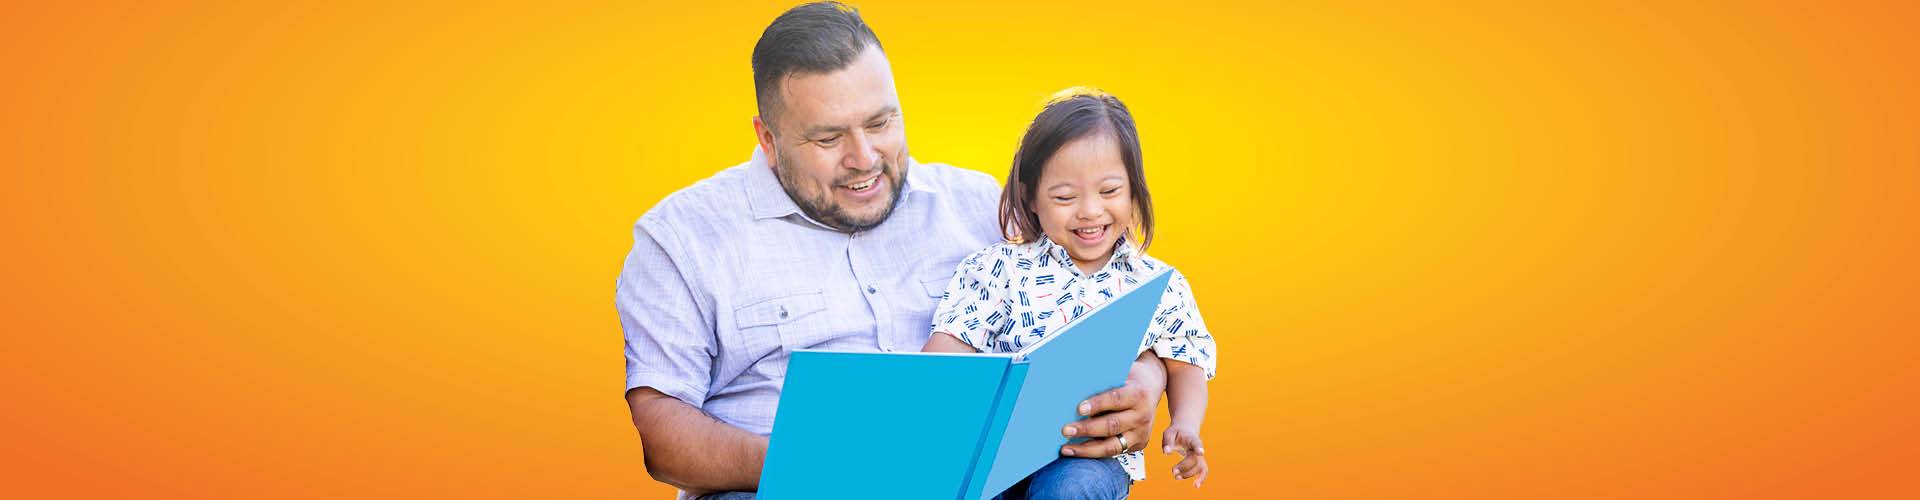 dad reading to kid